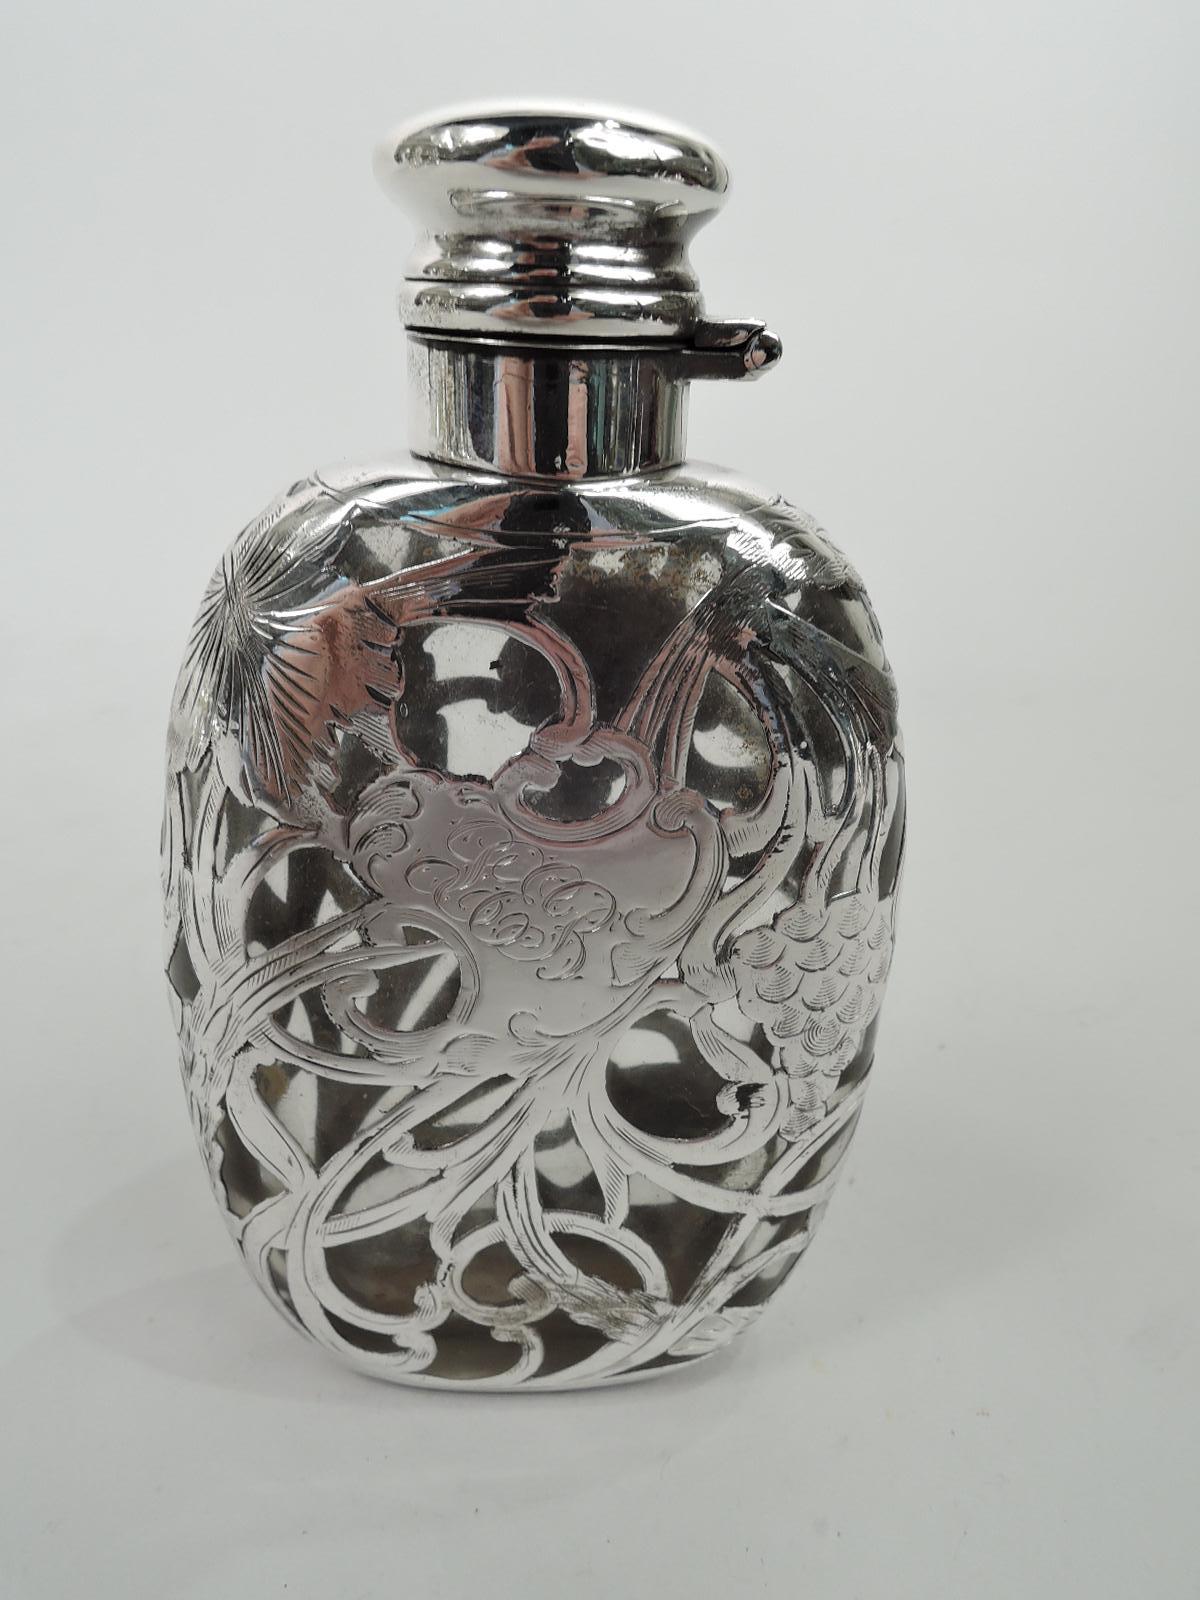 Turn-of-the-century Art Nouveau glass flask with engraved silver overlay. Flat with curved sides. Overlay in form of grain stalks and fruiting grapevine. Asymmetrical cartouche engraved with script monogram. Silver neck collar and hinged and